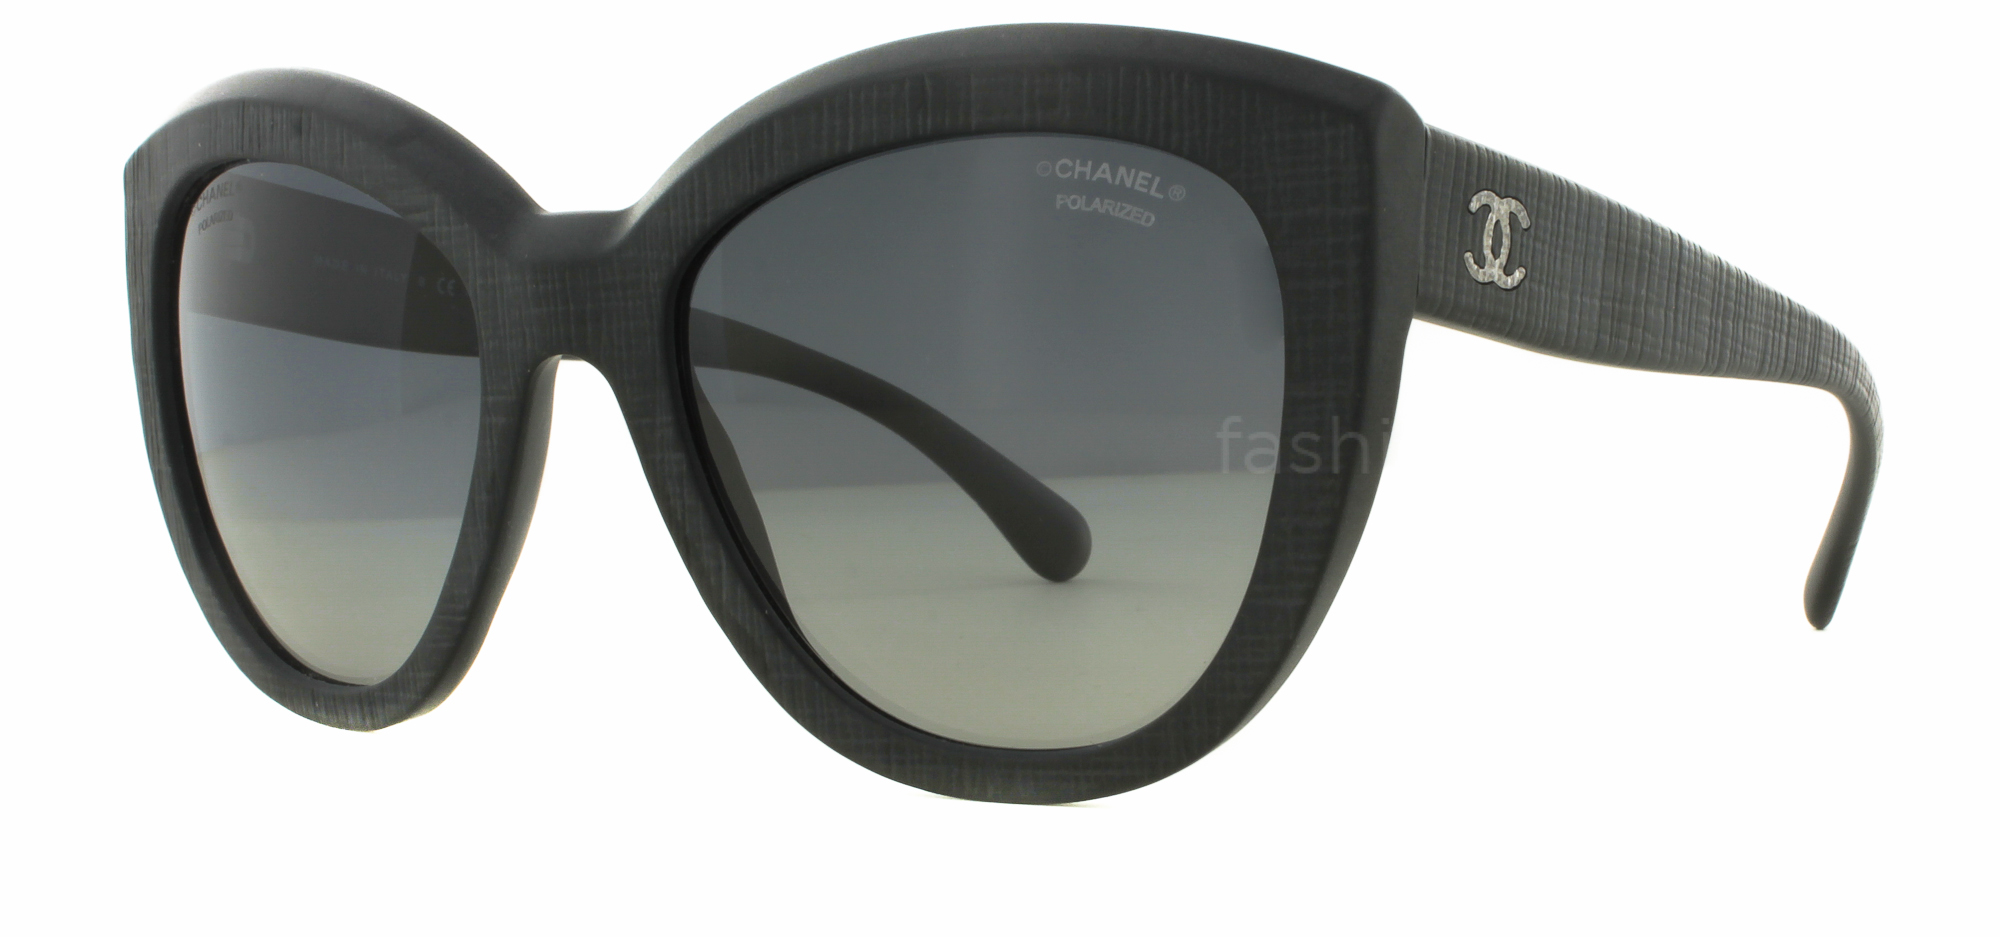 CHANEL 5332 501S8